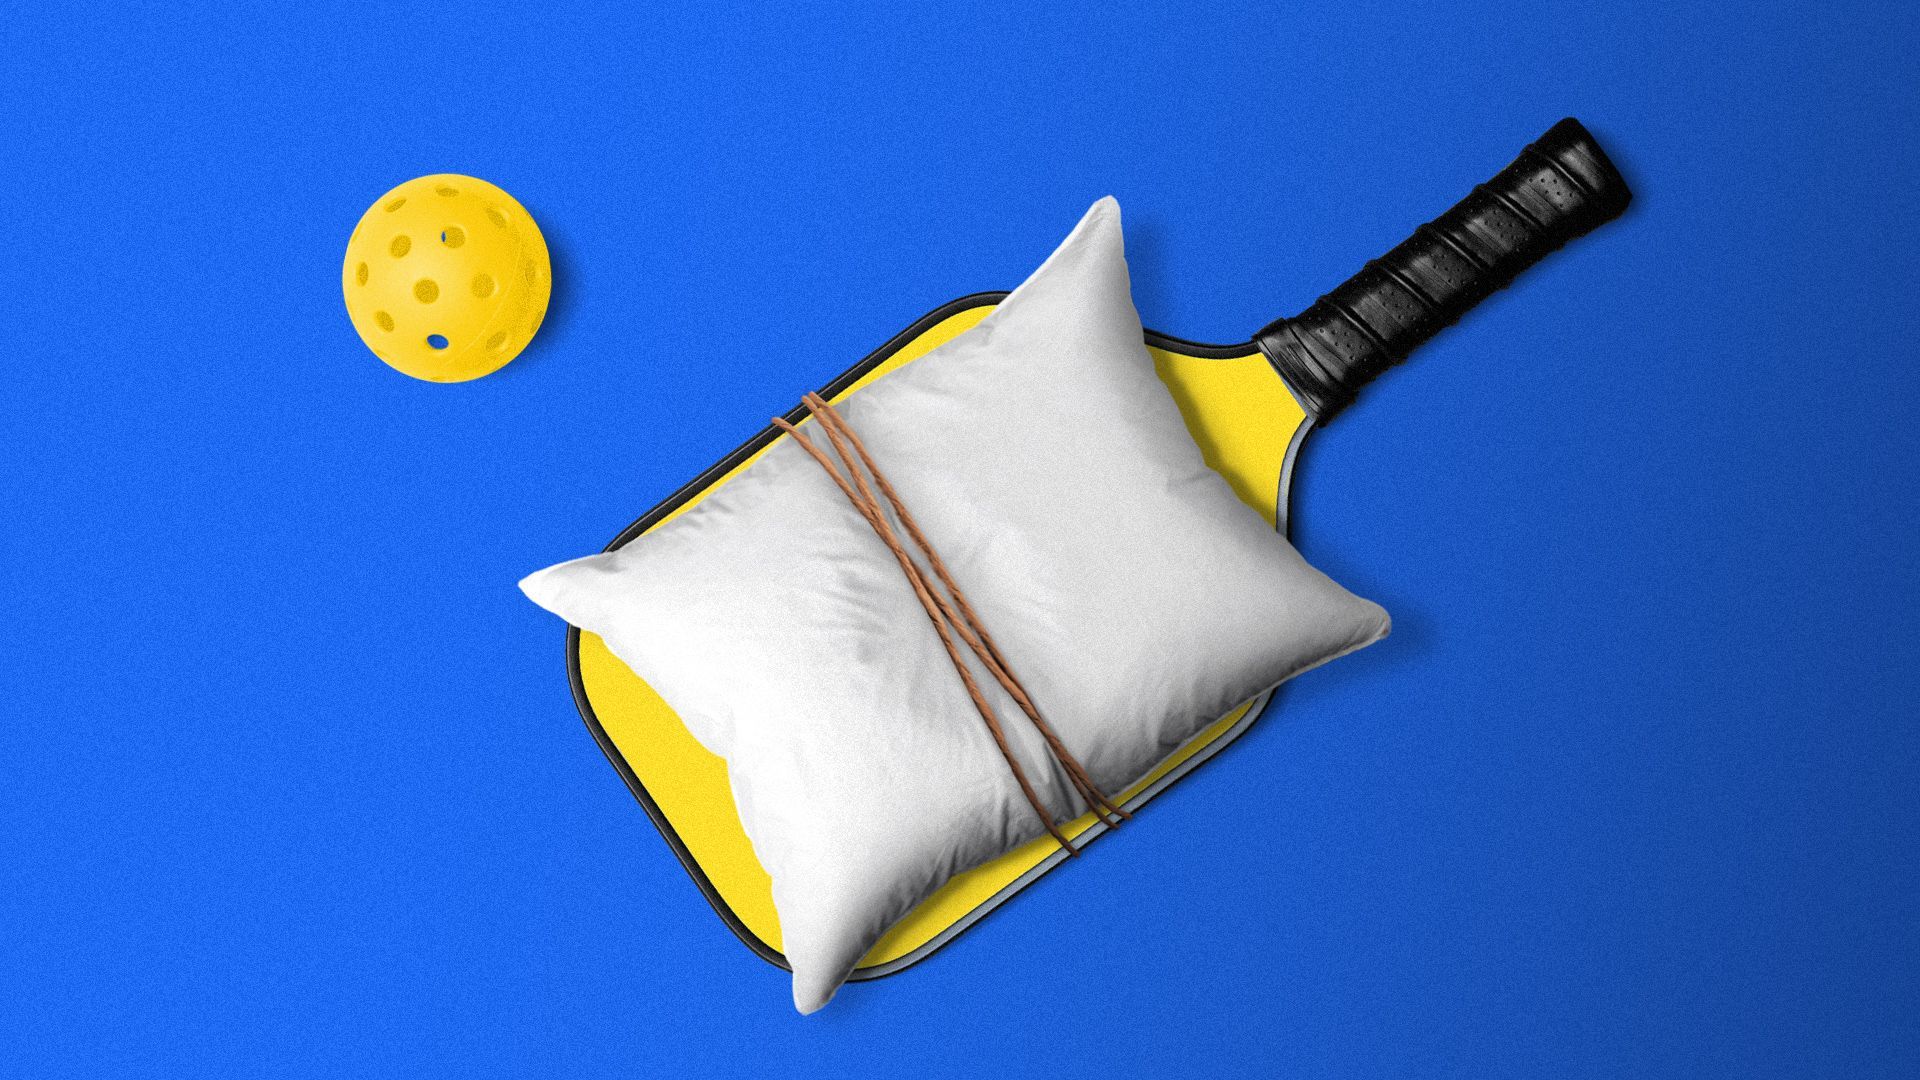 Illustration of a ball and a pickleball paddle with a pillow tied to it.